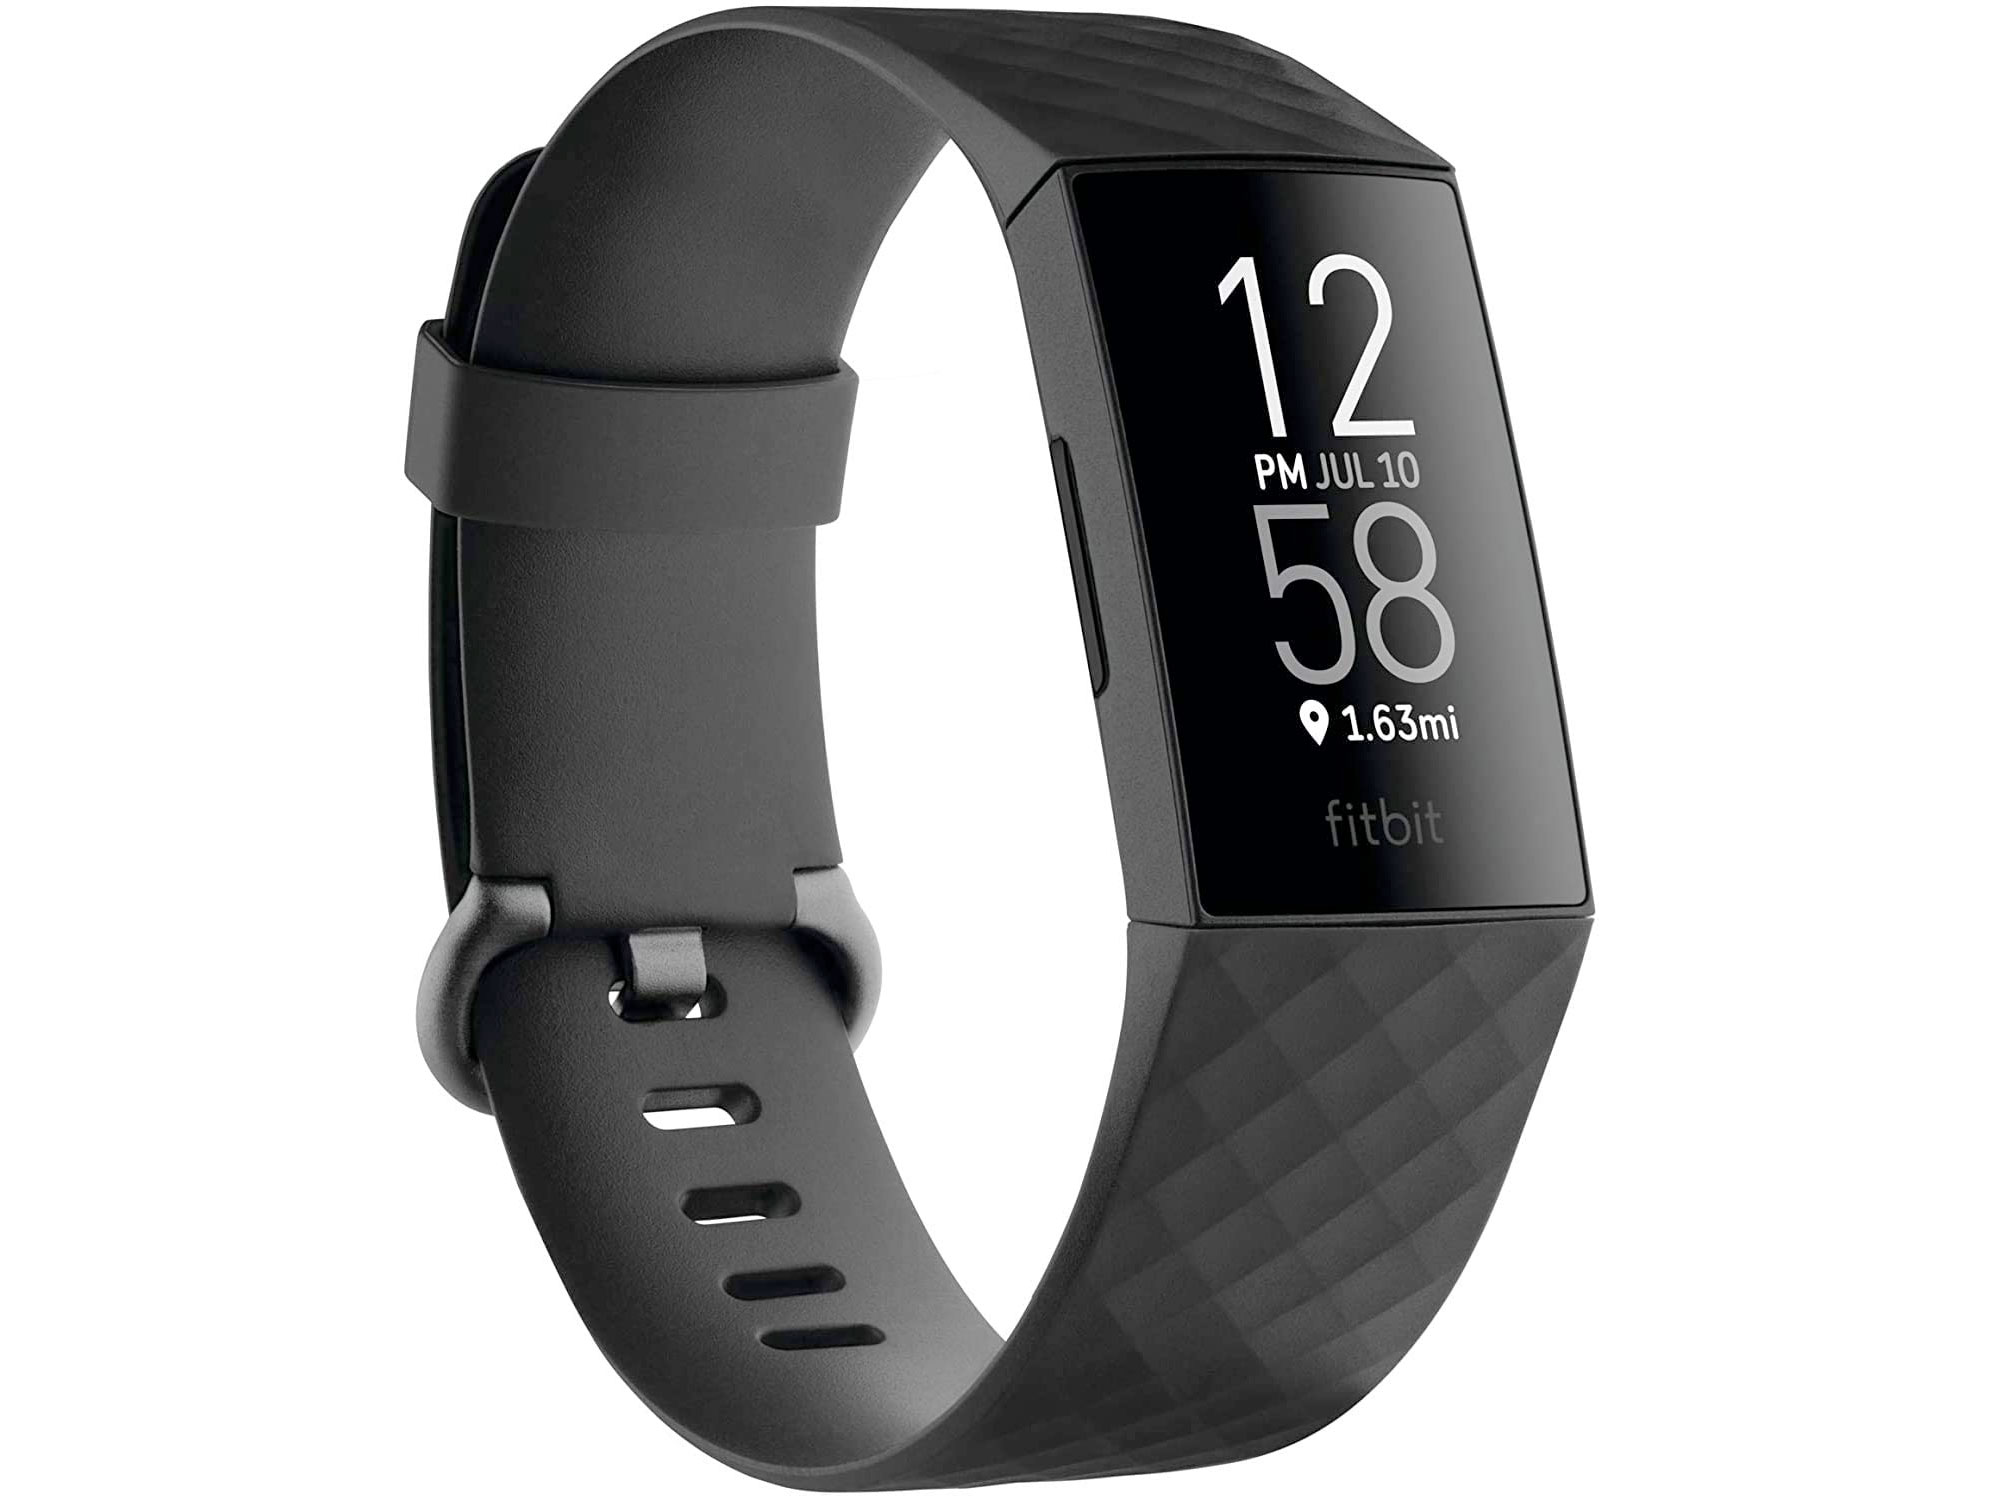 Amazon：Fitbit Charge 4 fitness and Activity Tracker只卖$129.95